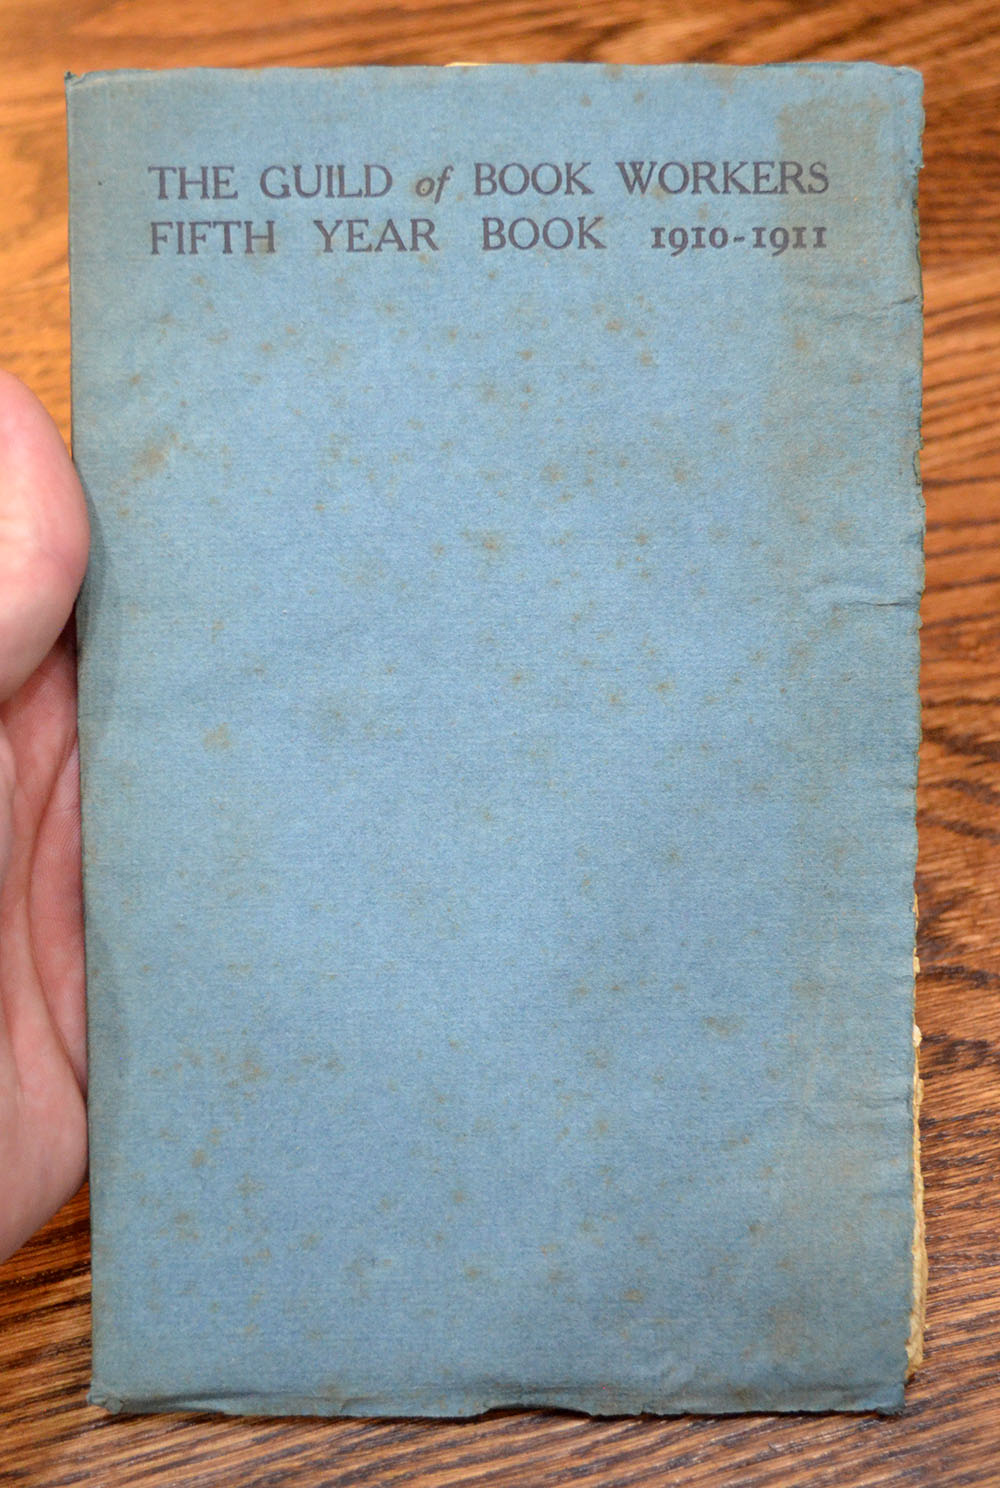 The Guild of Book Workers, Fifth Year Book (1910-1911)